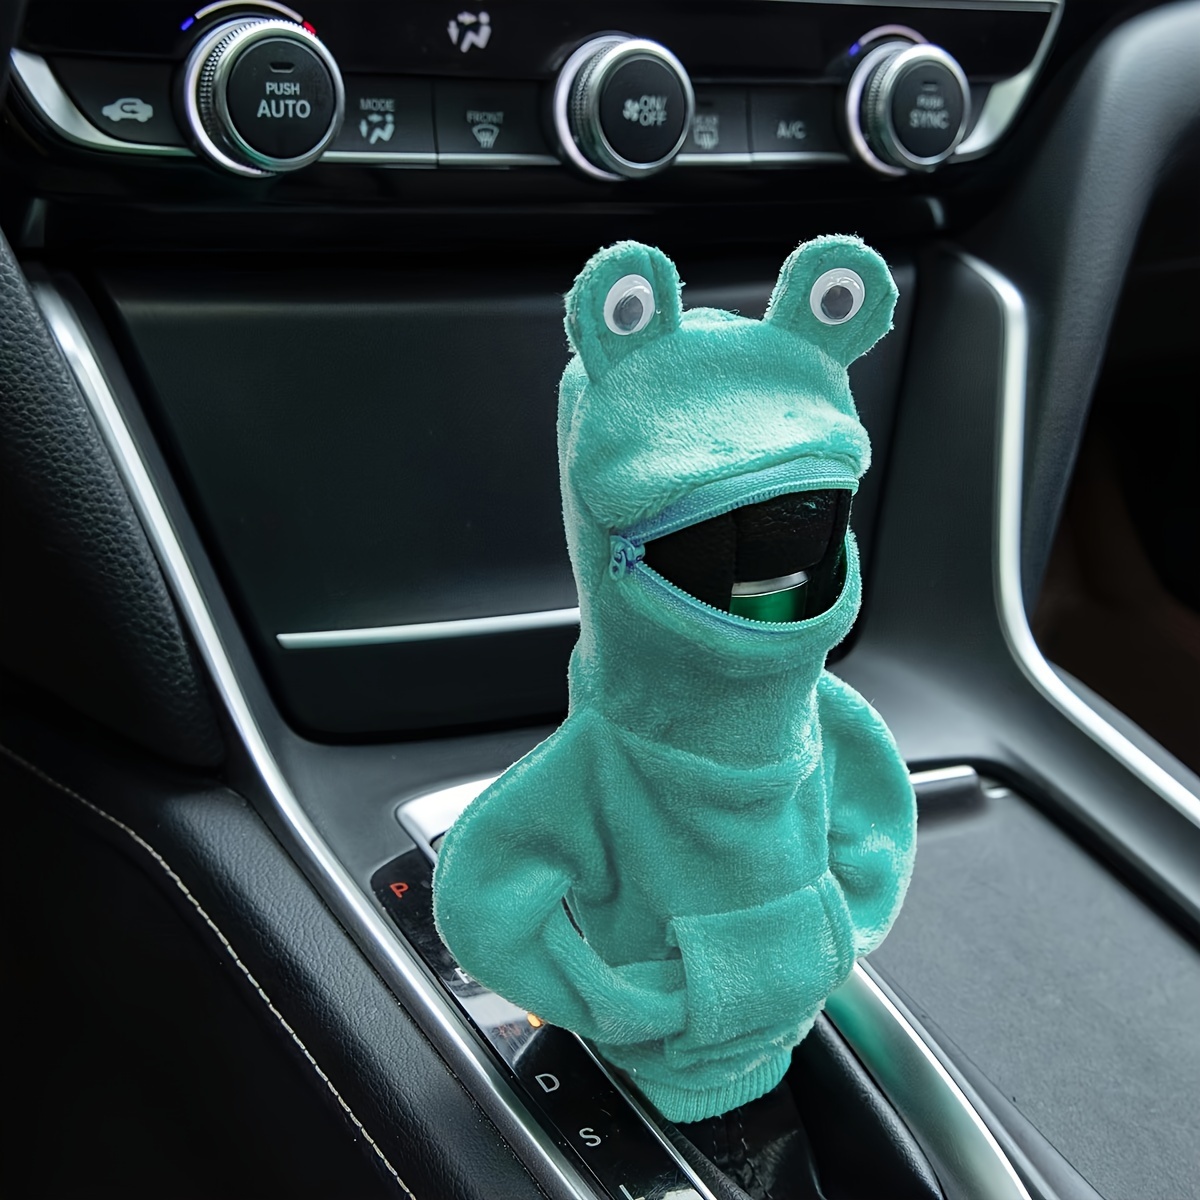 Gear Stick Hoodie Cover,Funny Car Gear Shift Cover,Frog/Shark Gear